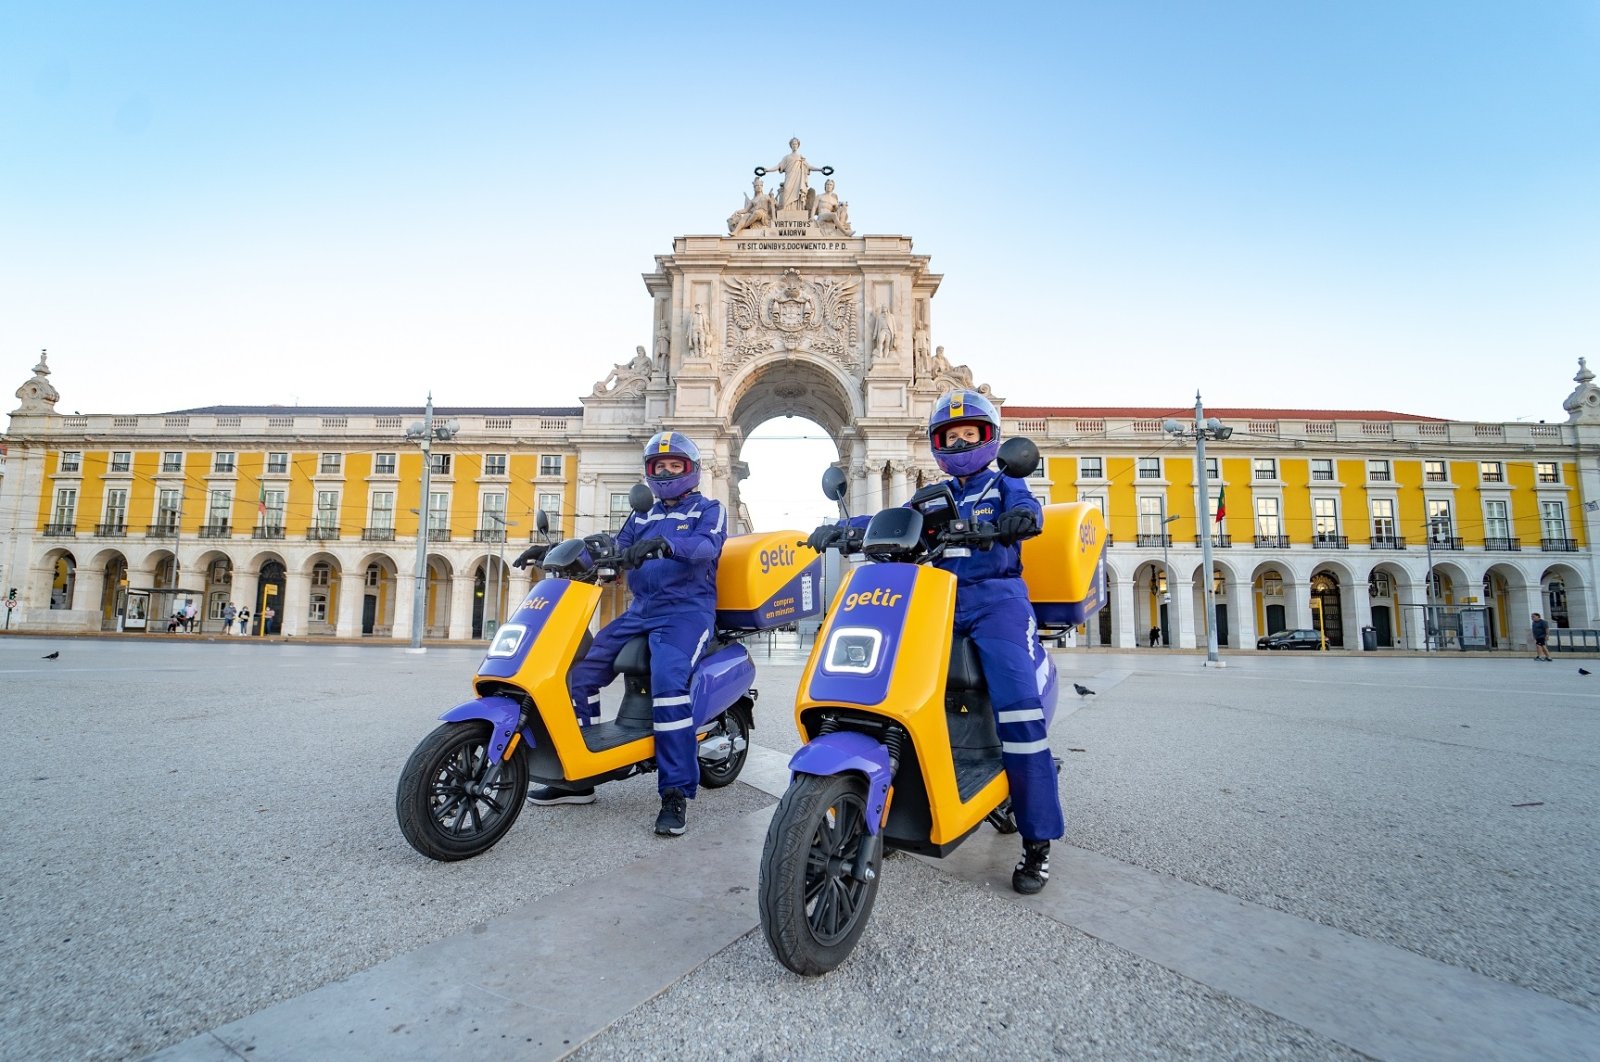 Getir couriers are seen in Lisbon, Portugal, Oct. 19, 2021. (DHA Photo)